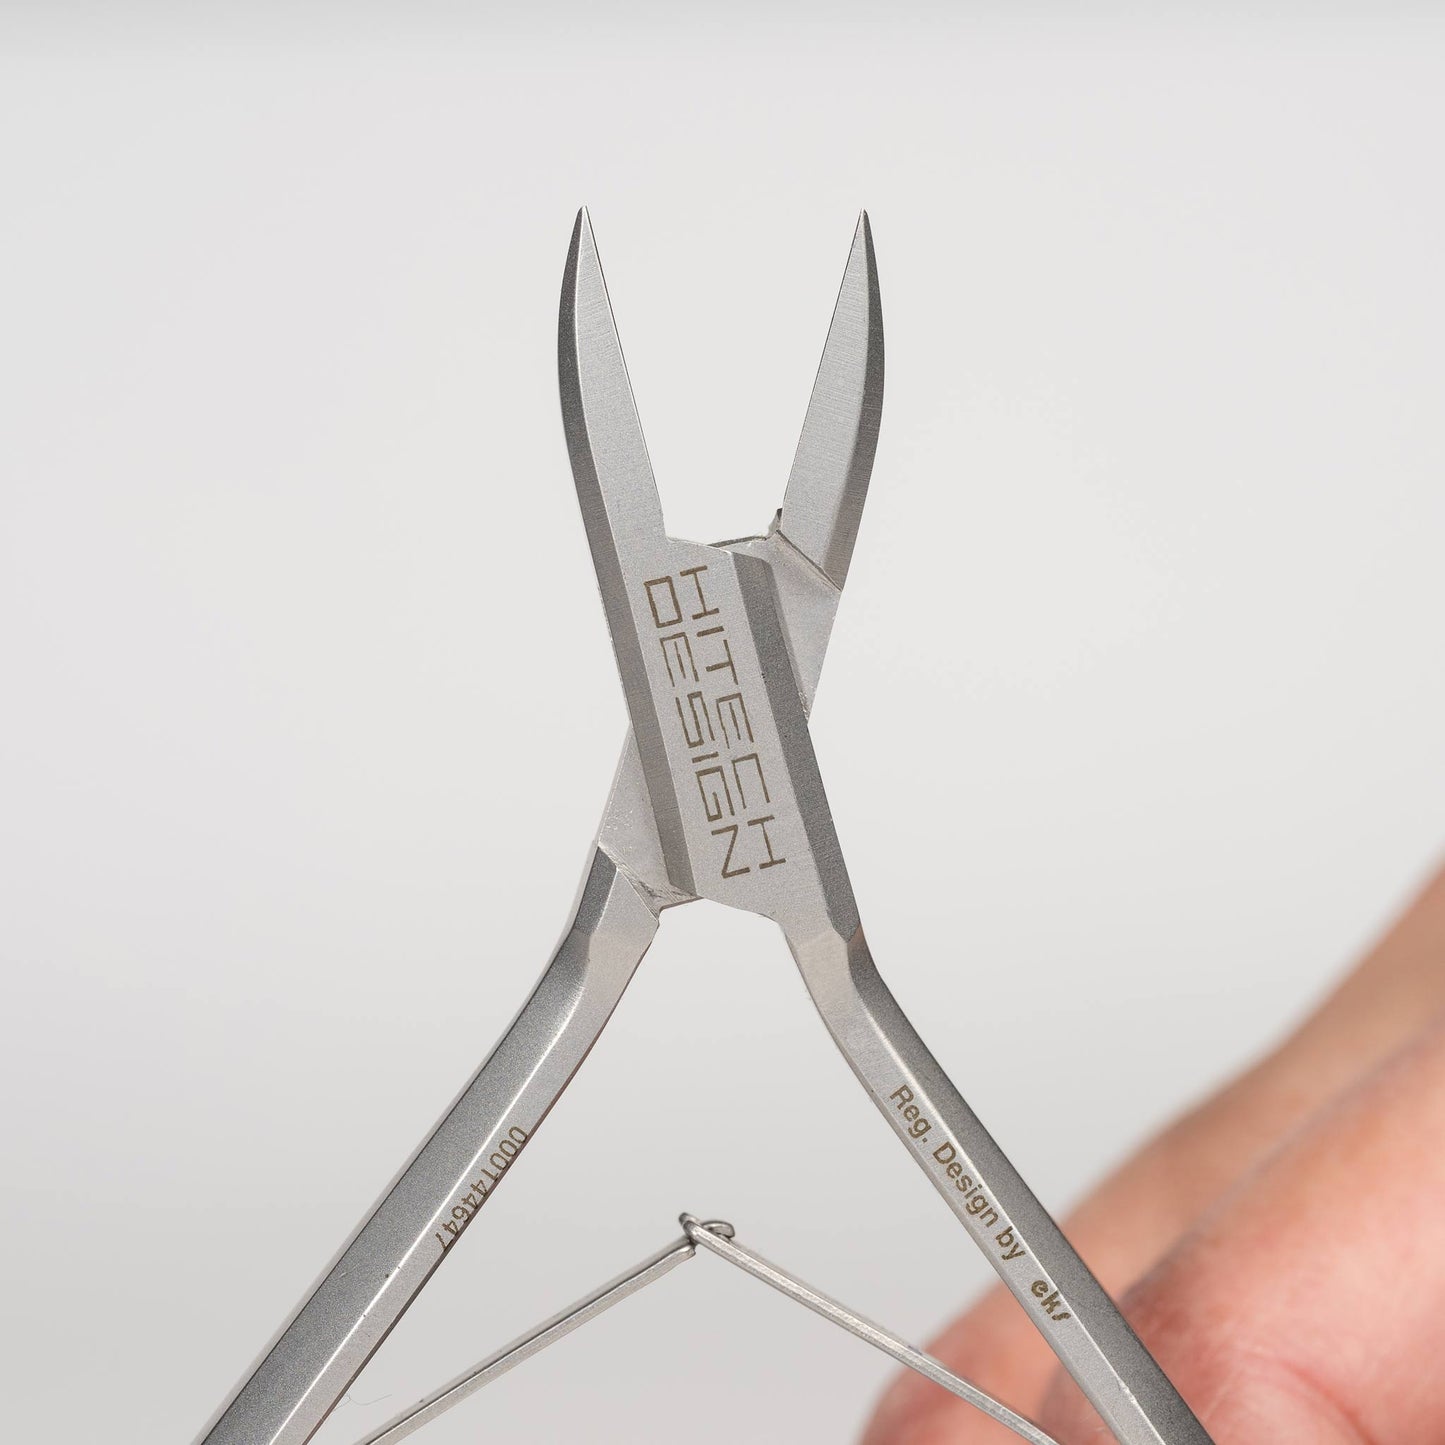 11.5 cm Podiatry Moderate Nail Nippers (15 mm Straight Cut) 66-22RD Open Jaws Macro Shot